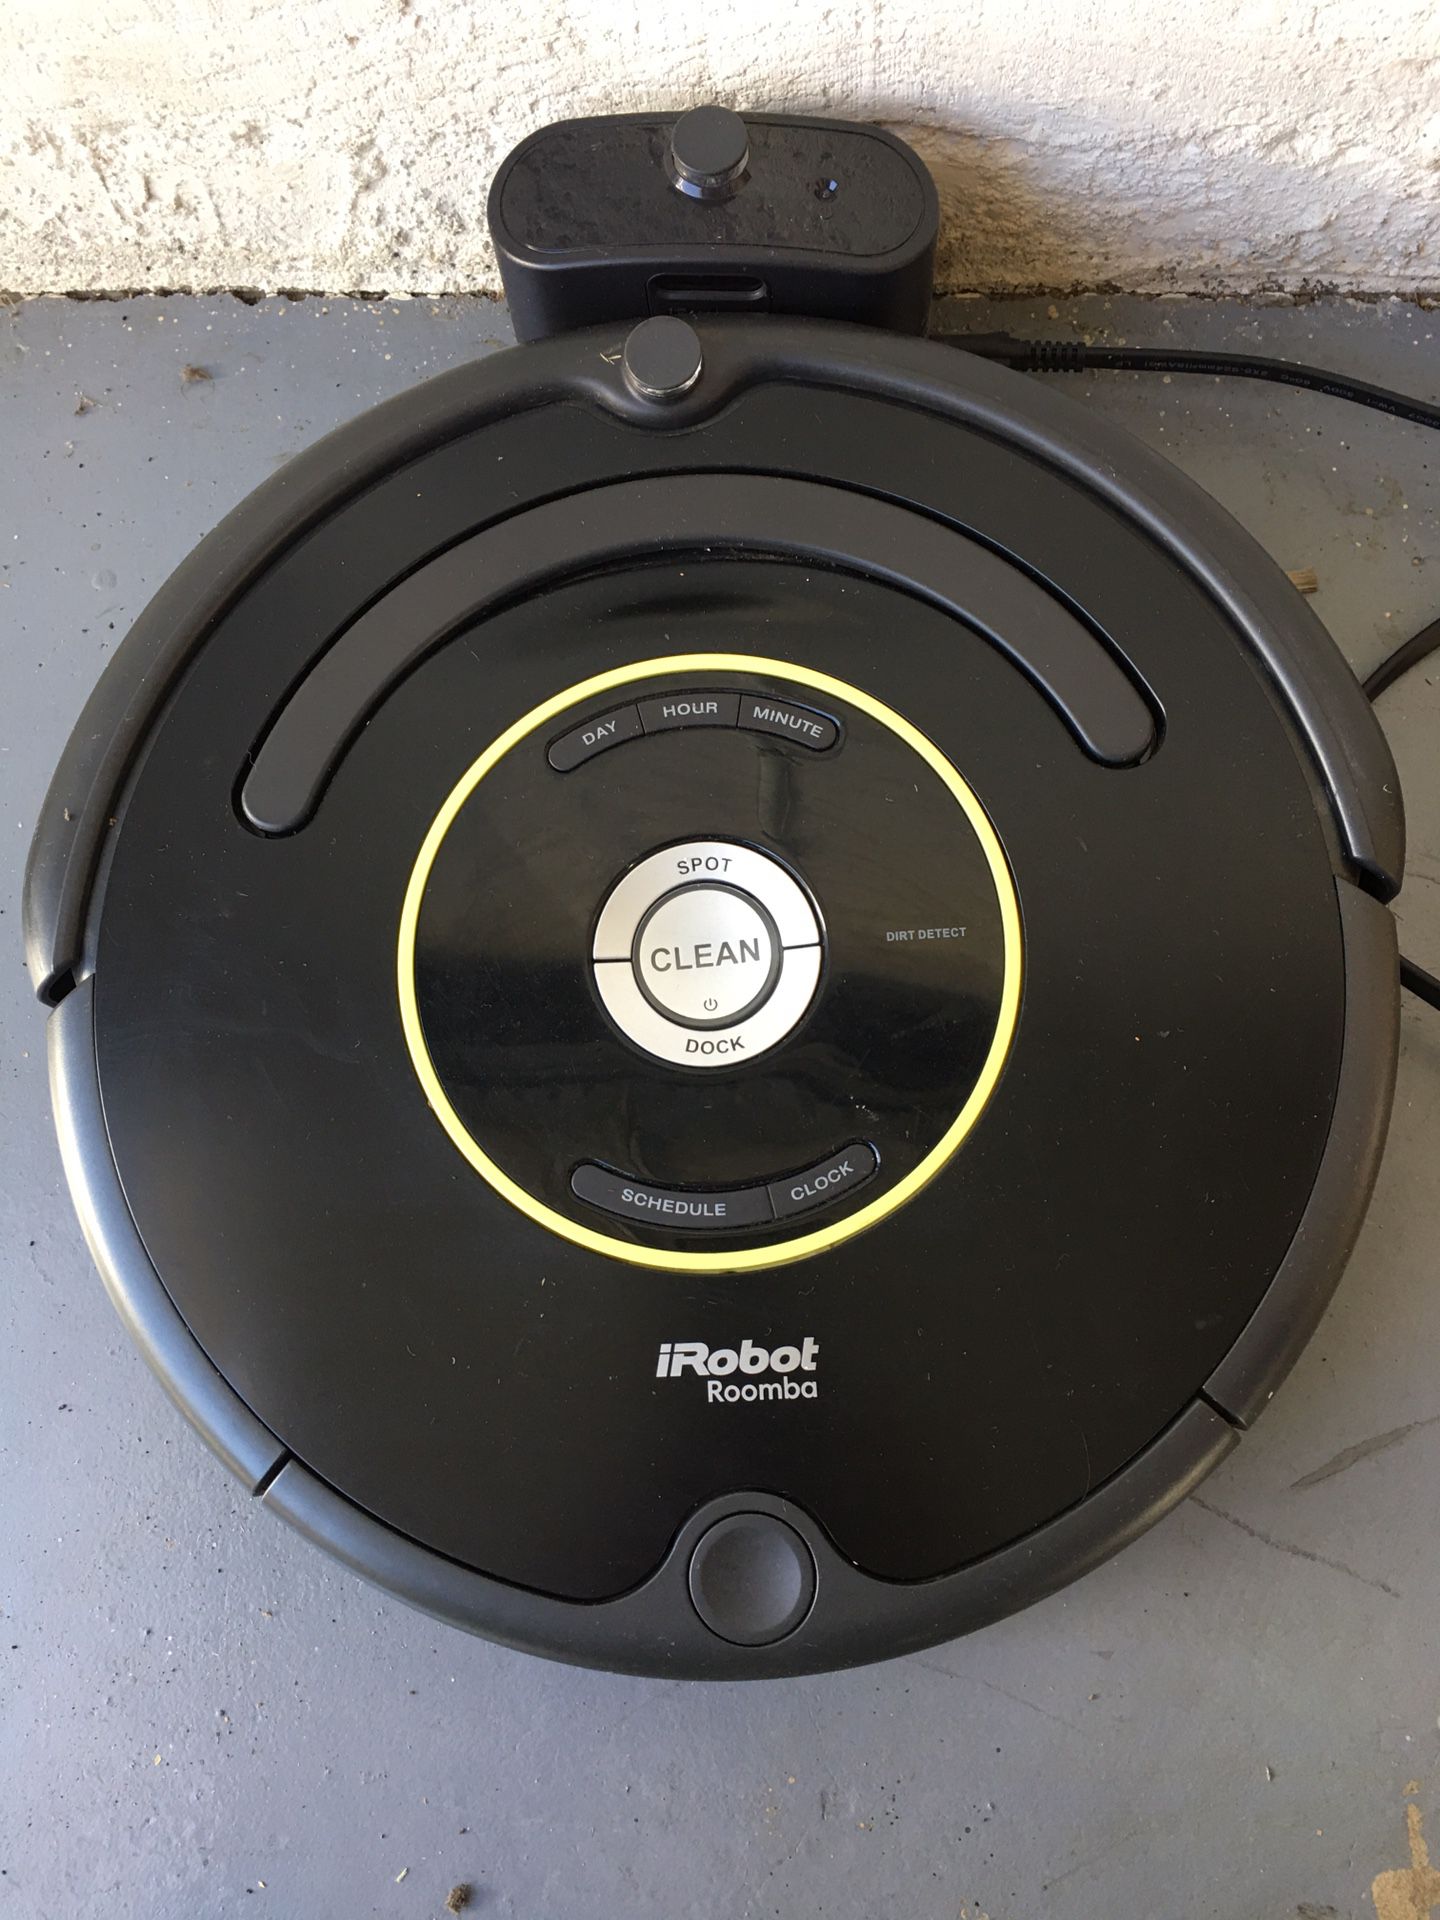 Summer Cleaning Sale: iRobot Roomba $250/OBO (orig $270) - used few times